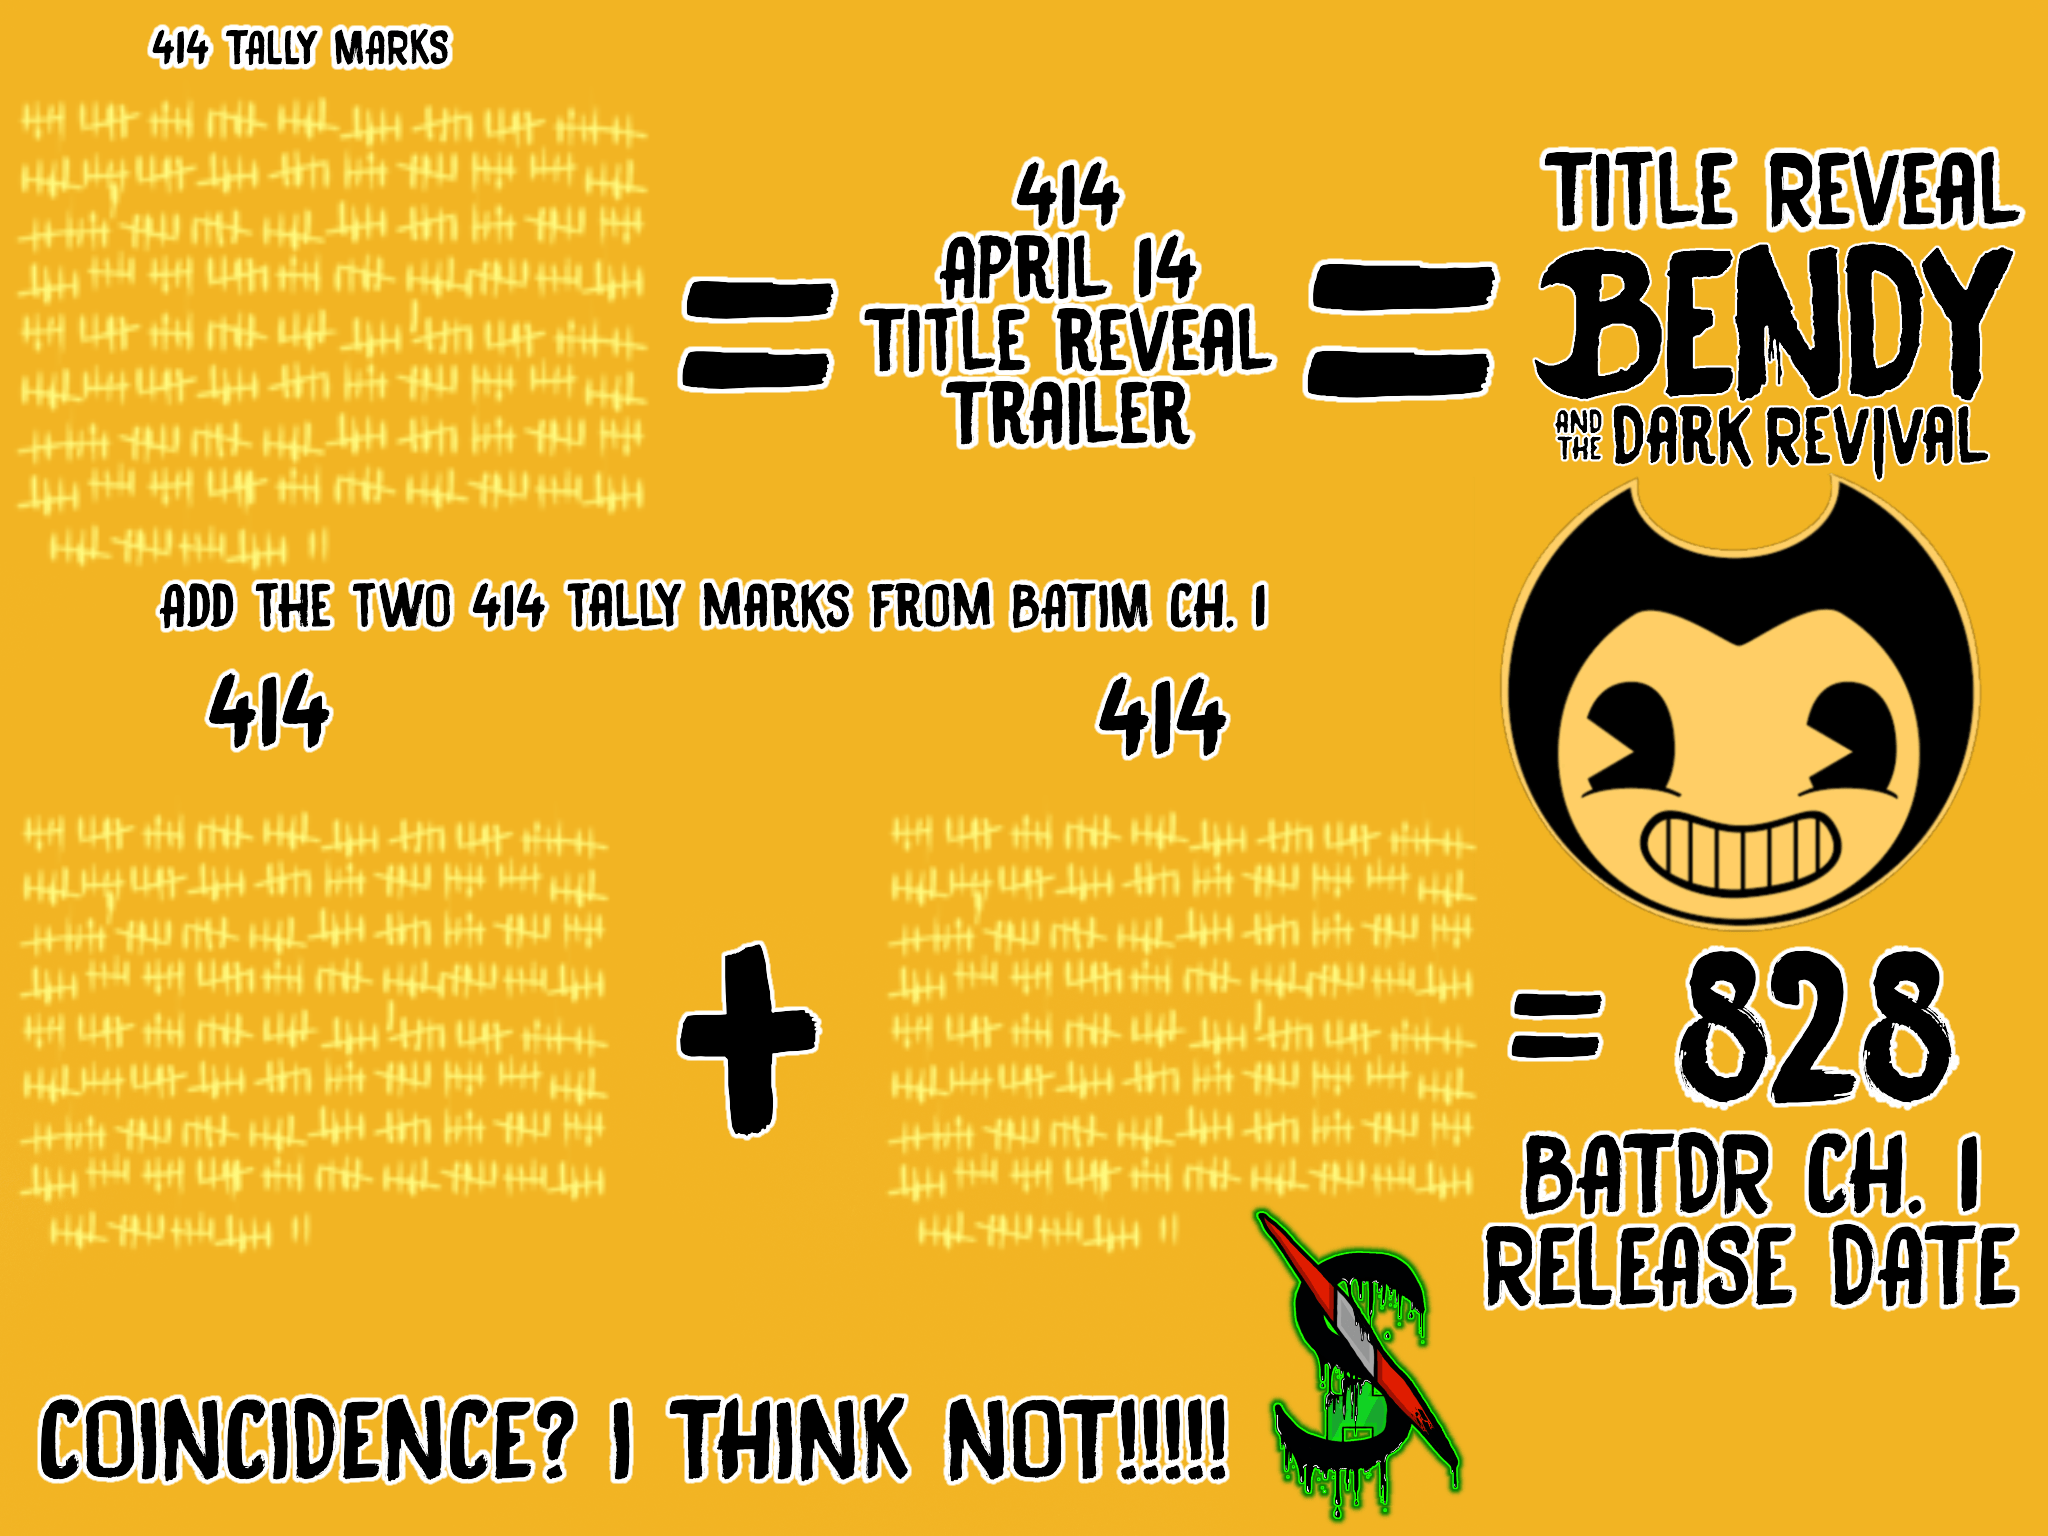 I THINK I FIGURED OUT THE DATE FOR BENDY AND THE DARK